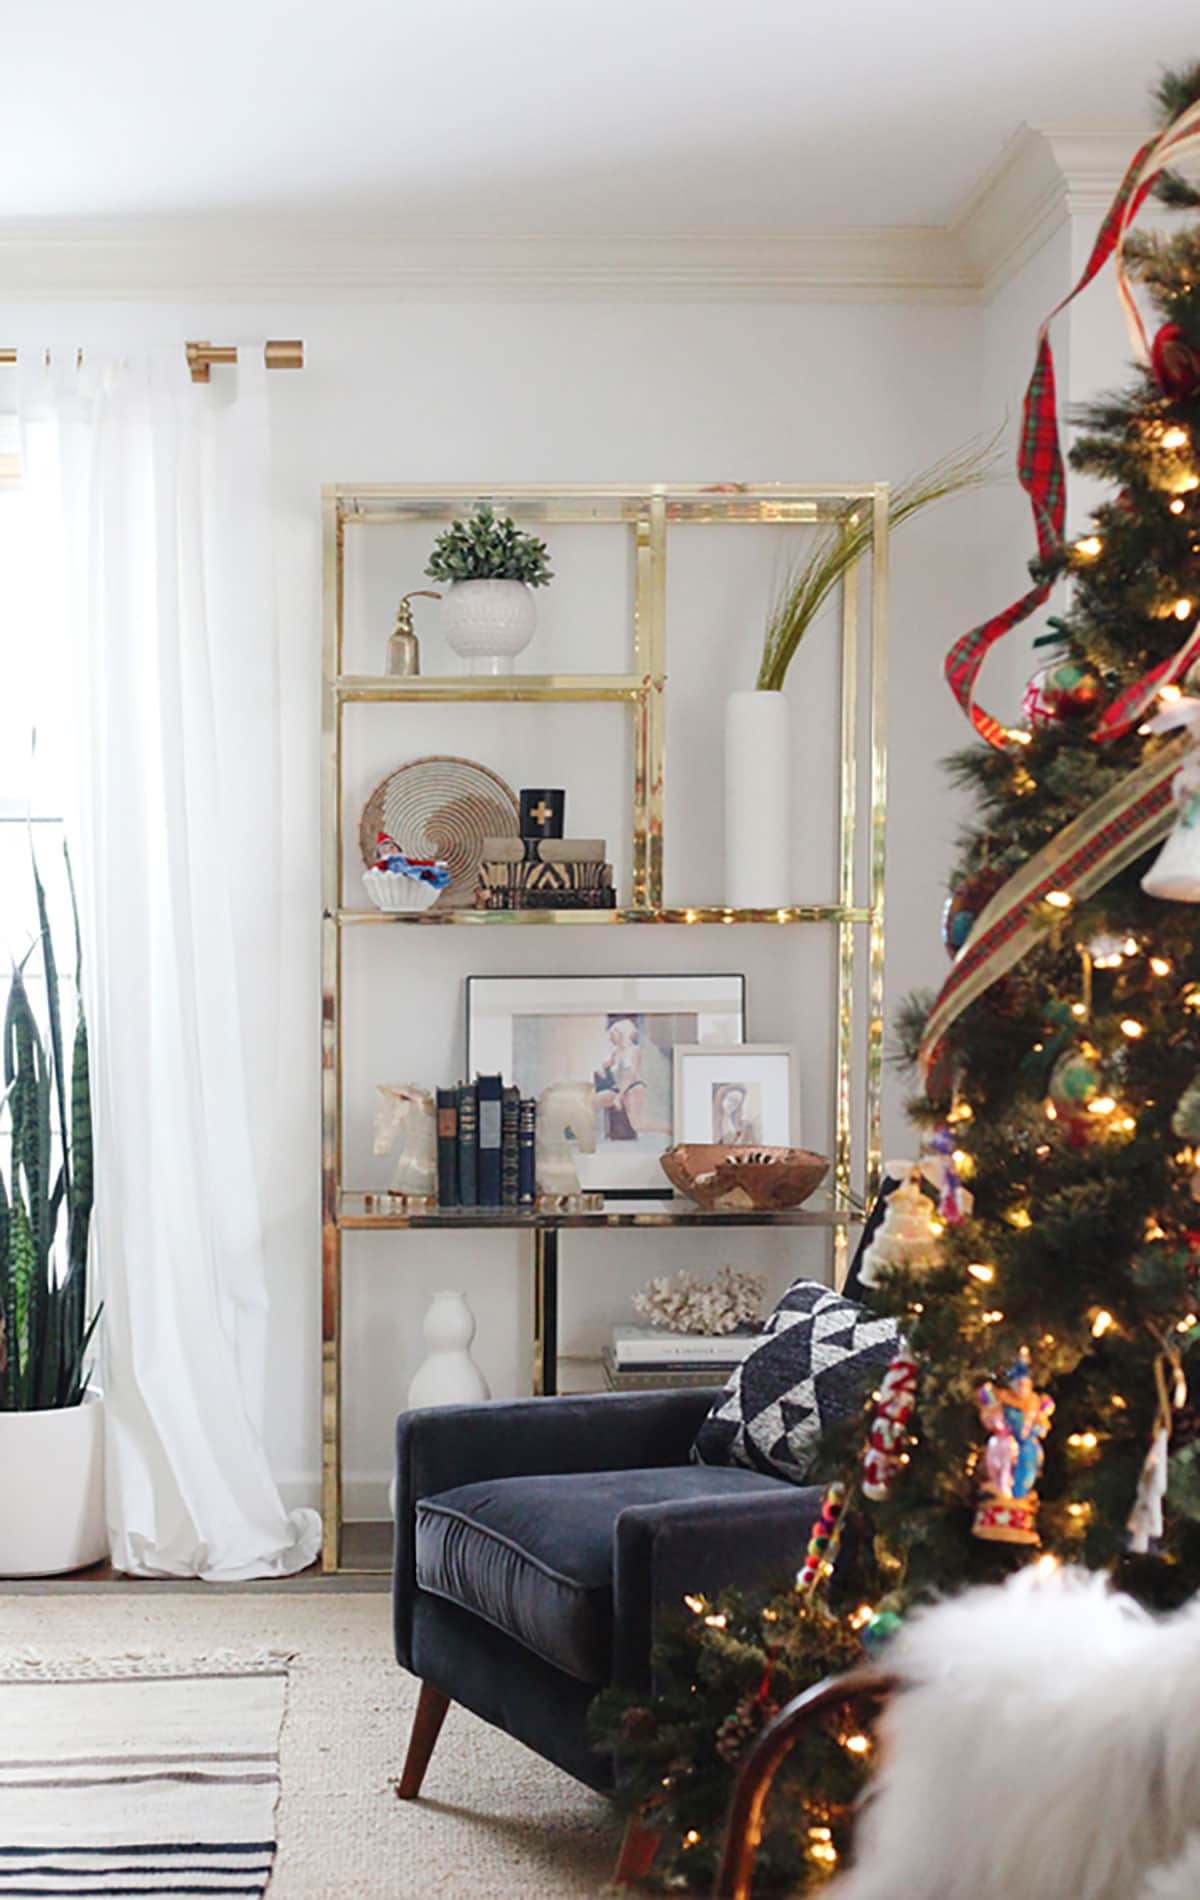 eclectic modern decor holiday home tour christmas